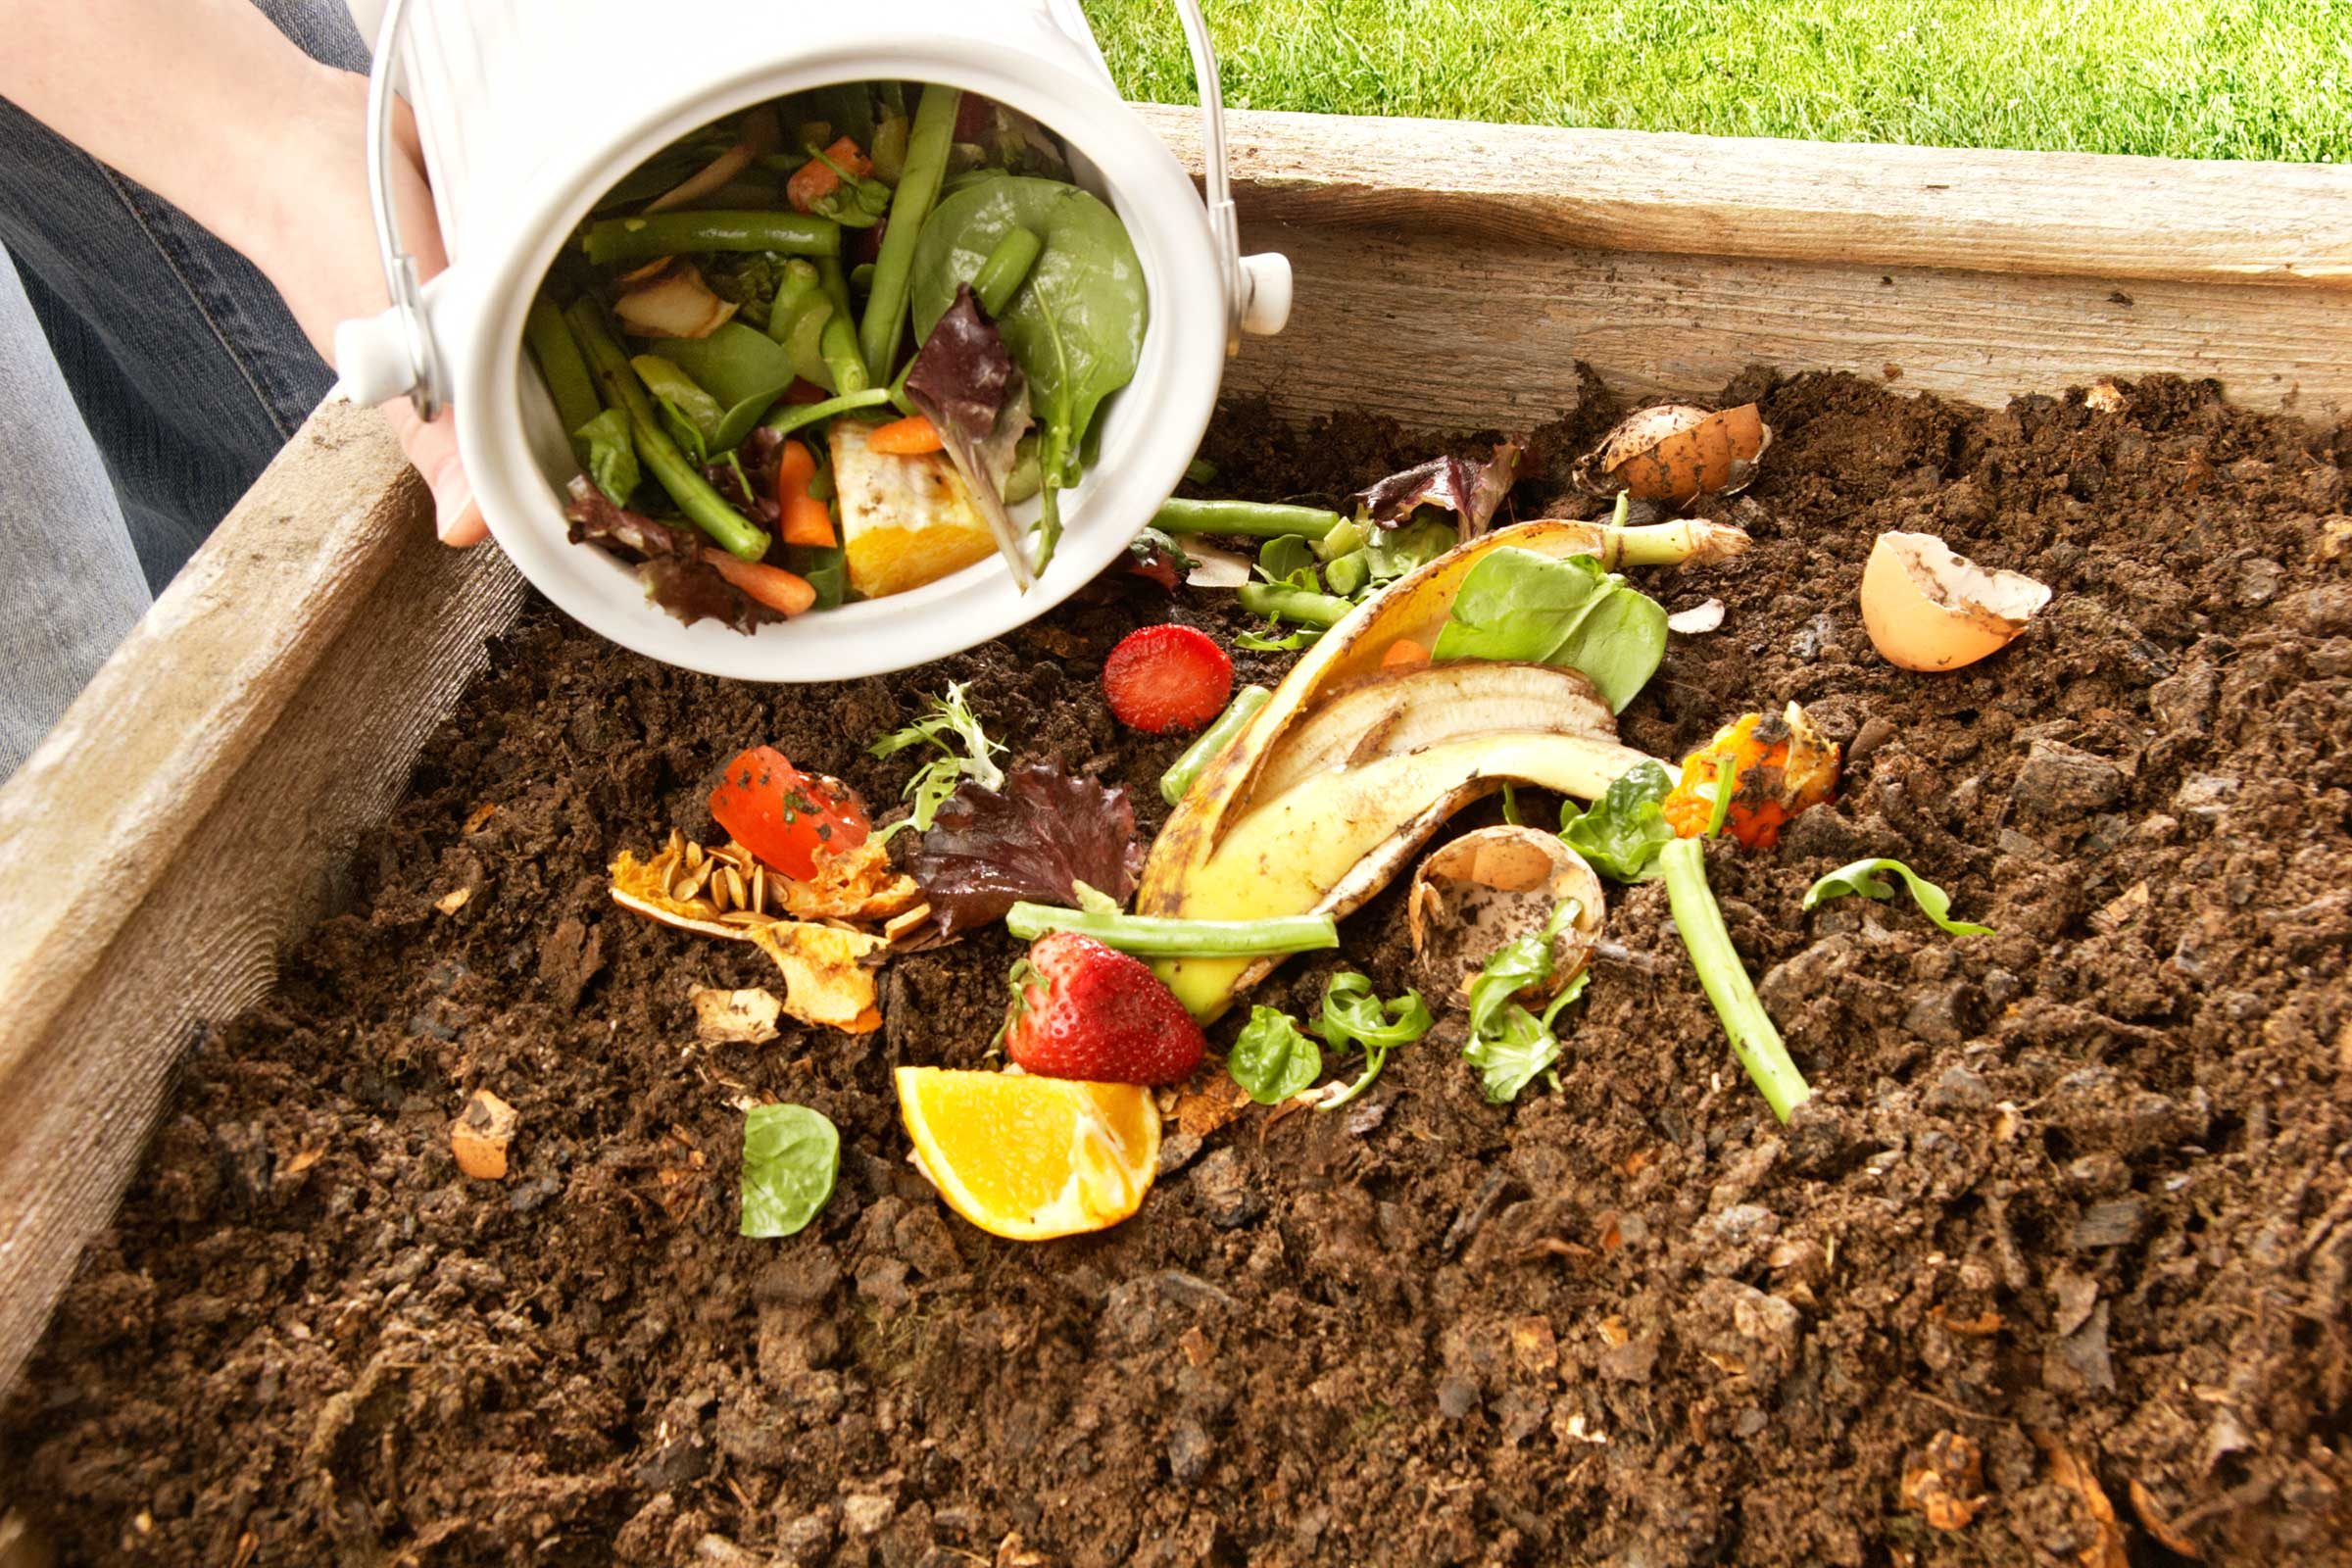 How To Compost 10 Simple Steps To Get Started Readers Digest